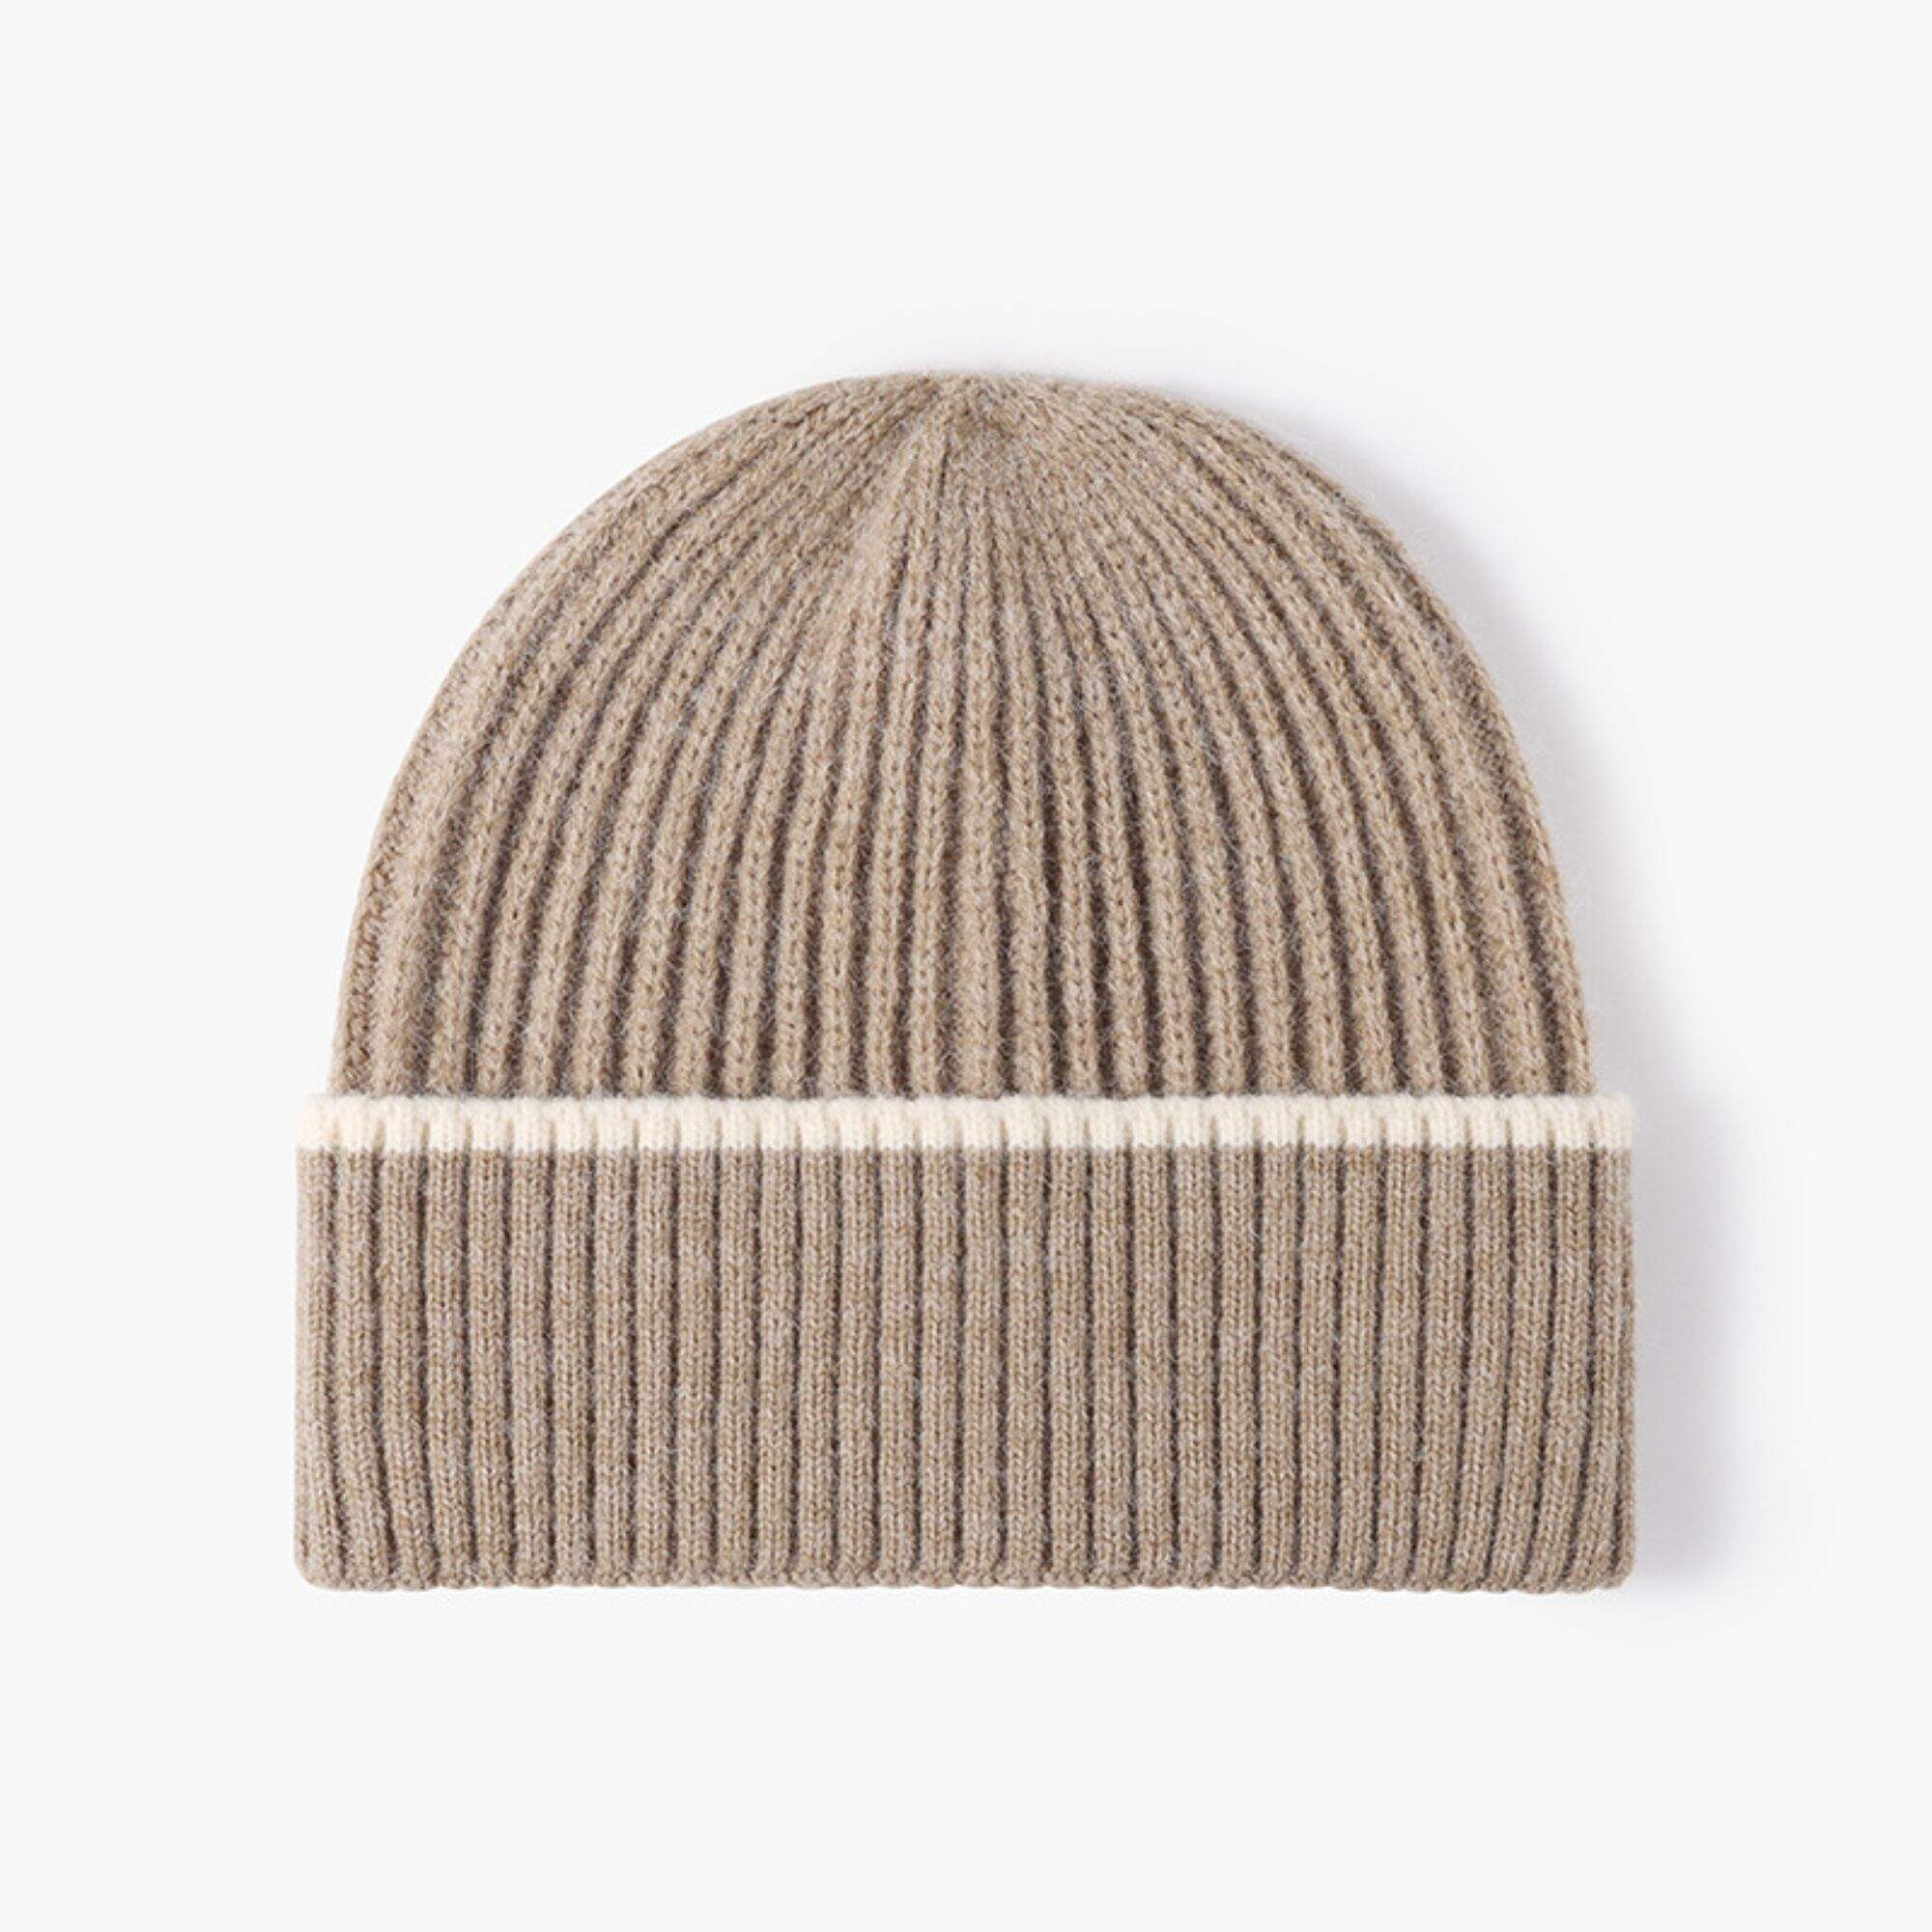 Matching beanie for men and women